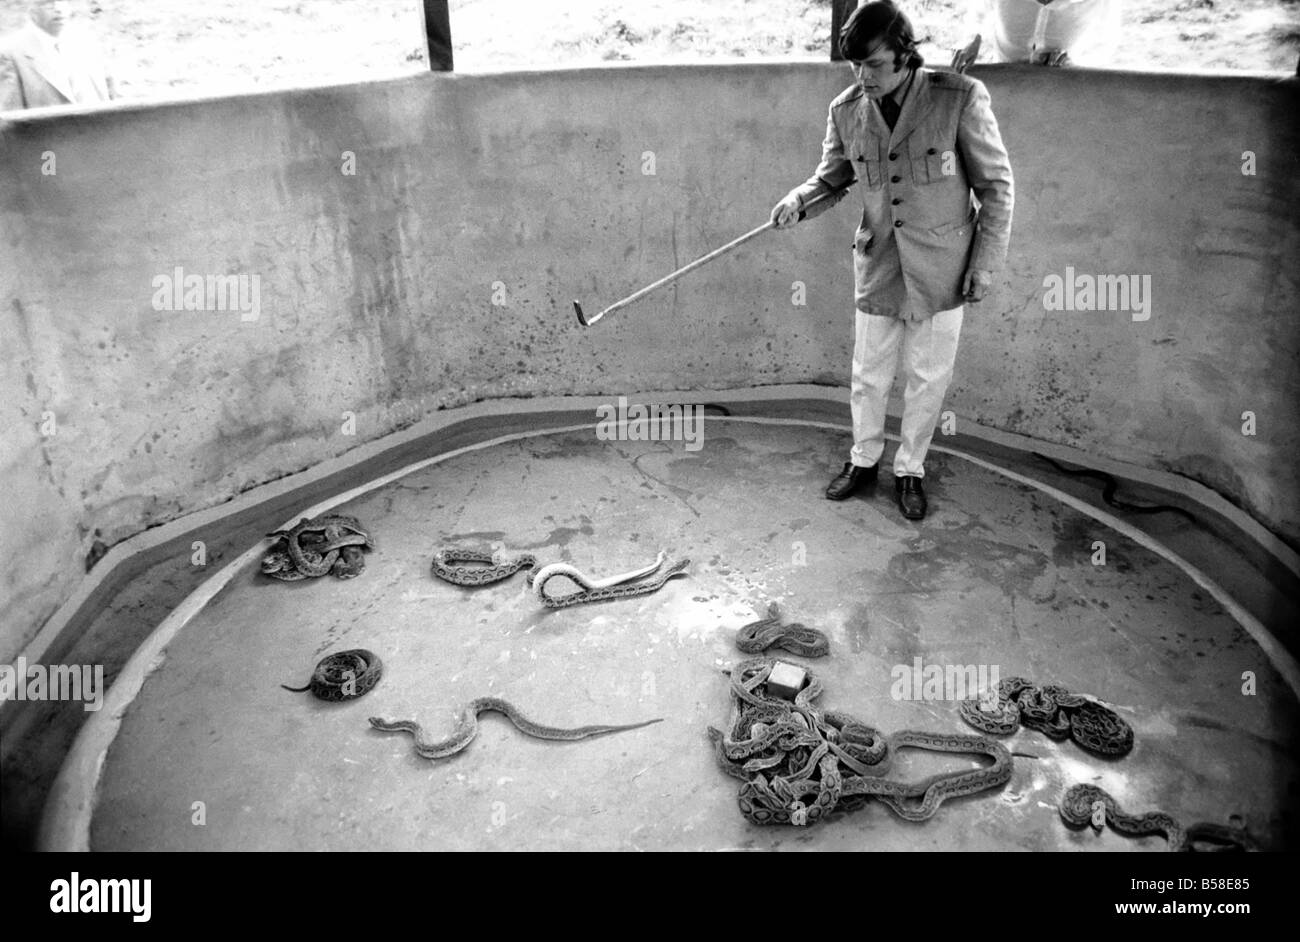 Snakes: Watched warily by his wife Patricia, snake handler Peter Waters goes back to work six days after one of his charges nearly killed him. He said: 'it's like falling off a bicycle. You have to get on again to keep your nerve.' Peter, 24-pictured with cobras in the snake pit at the Wild Animals Kingdom at Woburn, Beds added: 'I'm lucky to be alive'. July 1970 70-6874-007 Stock Photo